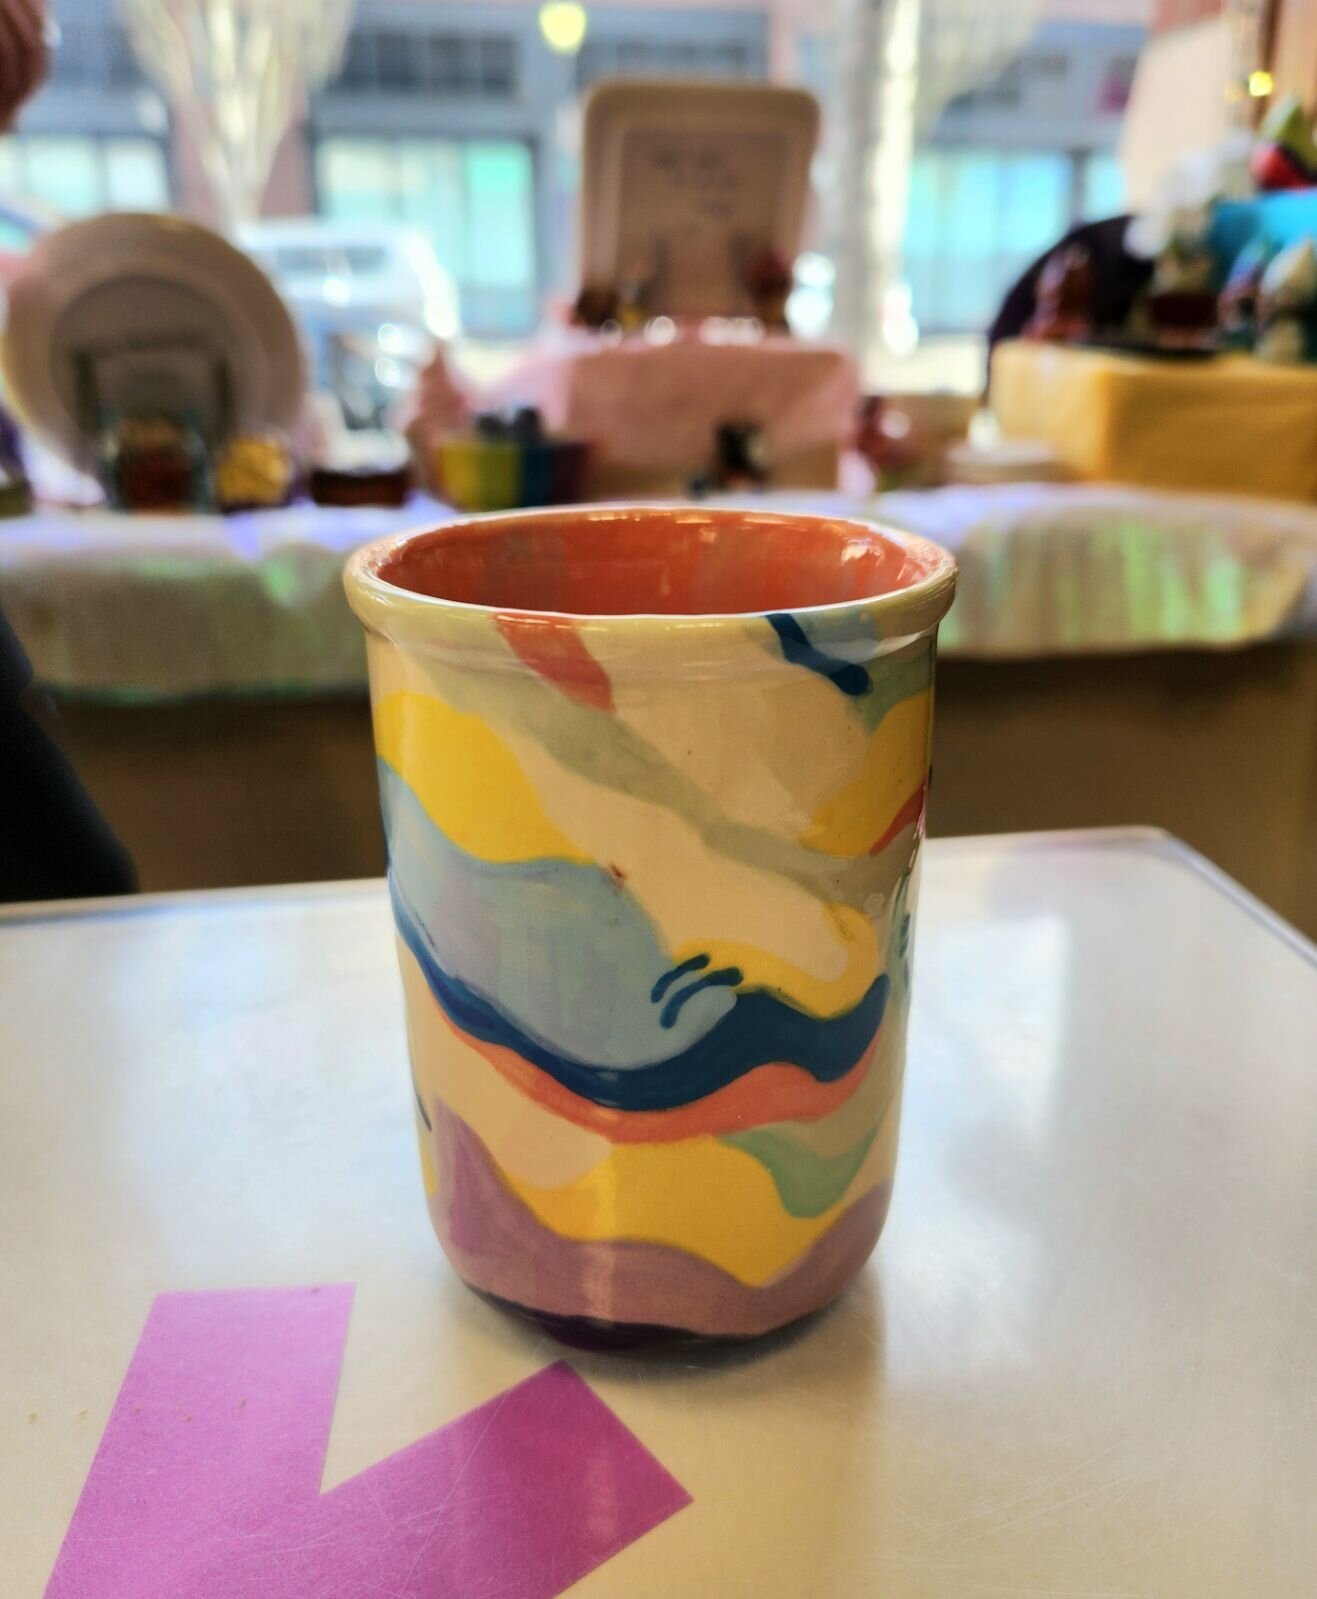 Customer Piece. This pen cup became a vibrant canvas of abstract landscape art.
https://paintawaynow.com/

#redmondtowncenter #potterypainting #pyop #buylocal #experienceredmond #becreative #shopsmall  #kidsactivities #kidspainting #ceramicpainting #